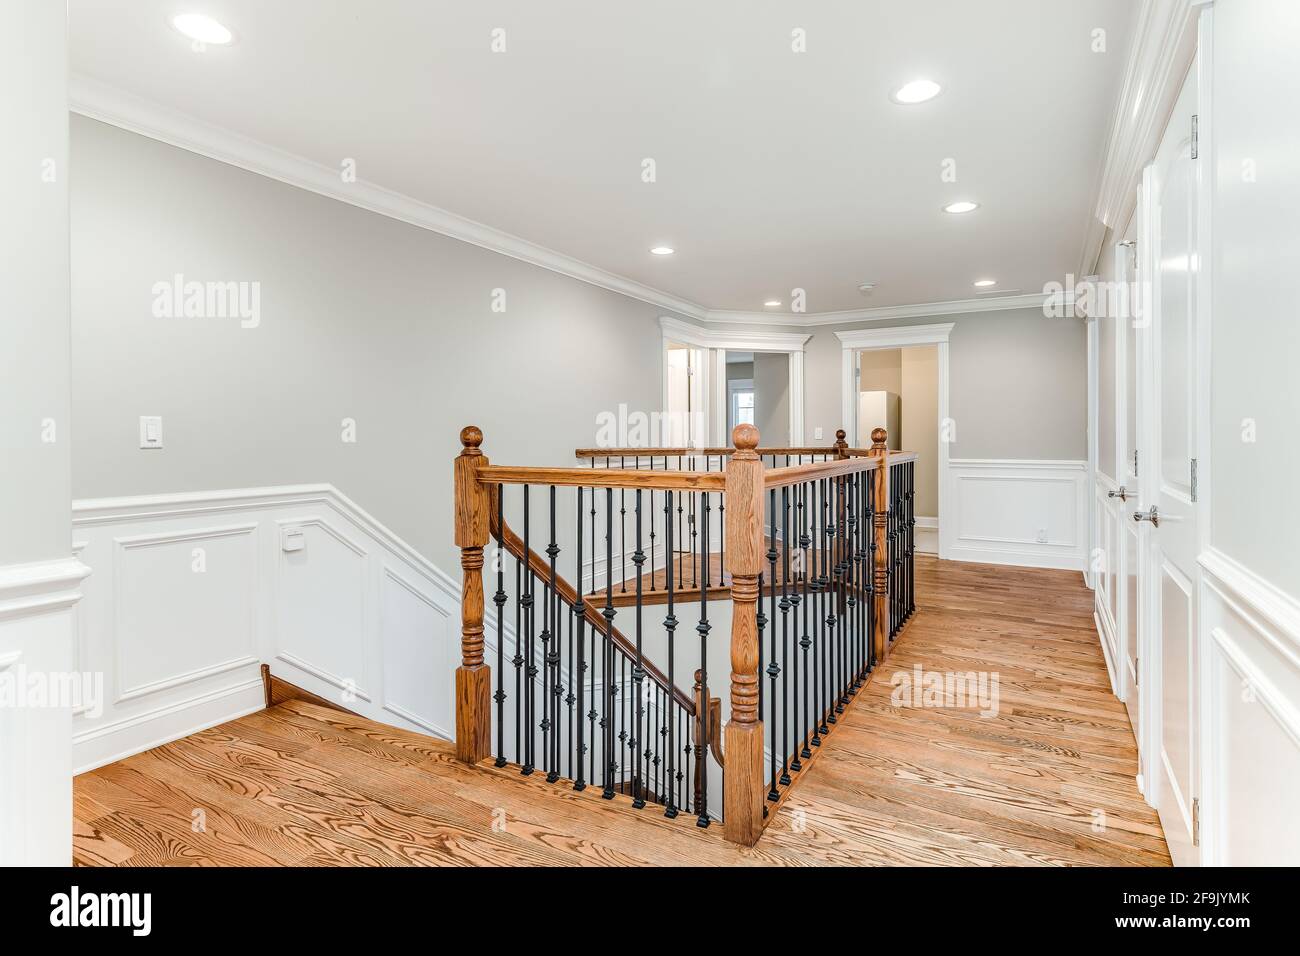 A renovated staircase with wrought iron spindles and wooden railing. The walls have a white board and batten finish around the room. Stock Photo